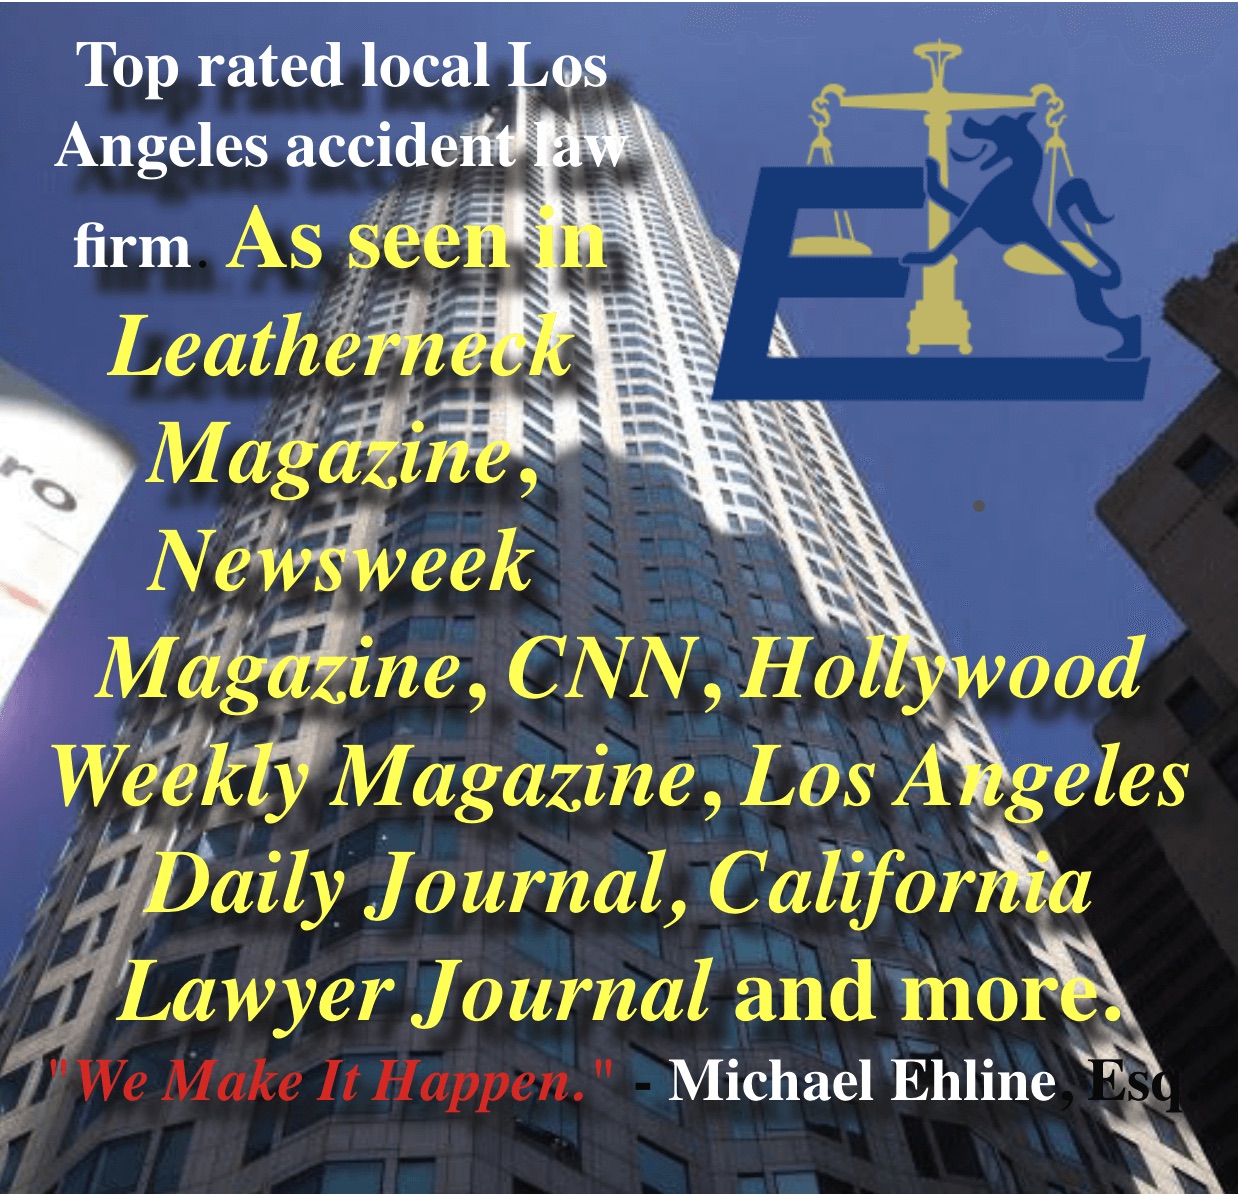 Ehline Law Firm Personal Injury Attorneys, APLC are top-rated Los Angeles Car Accident Attorneys in the local News.